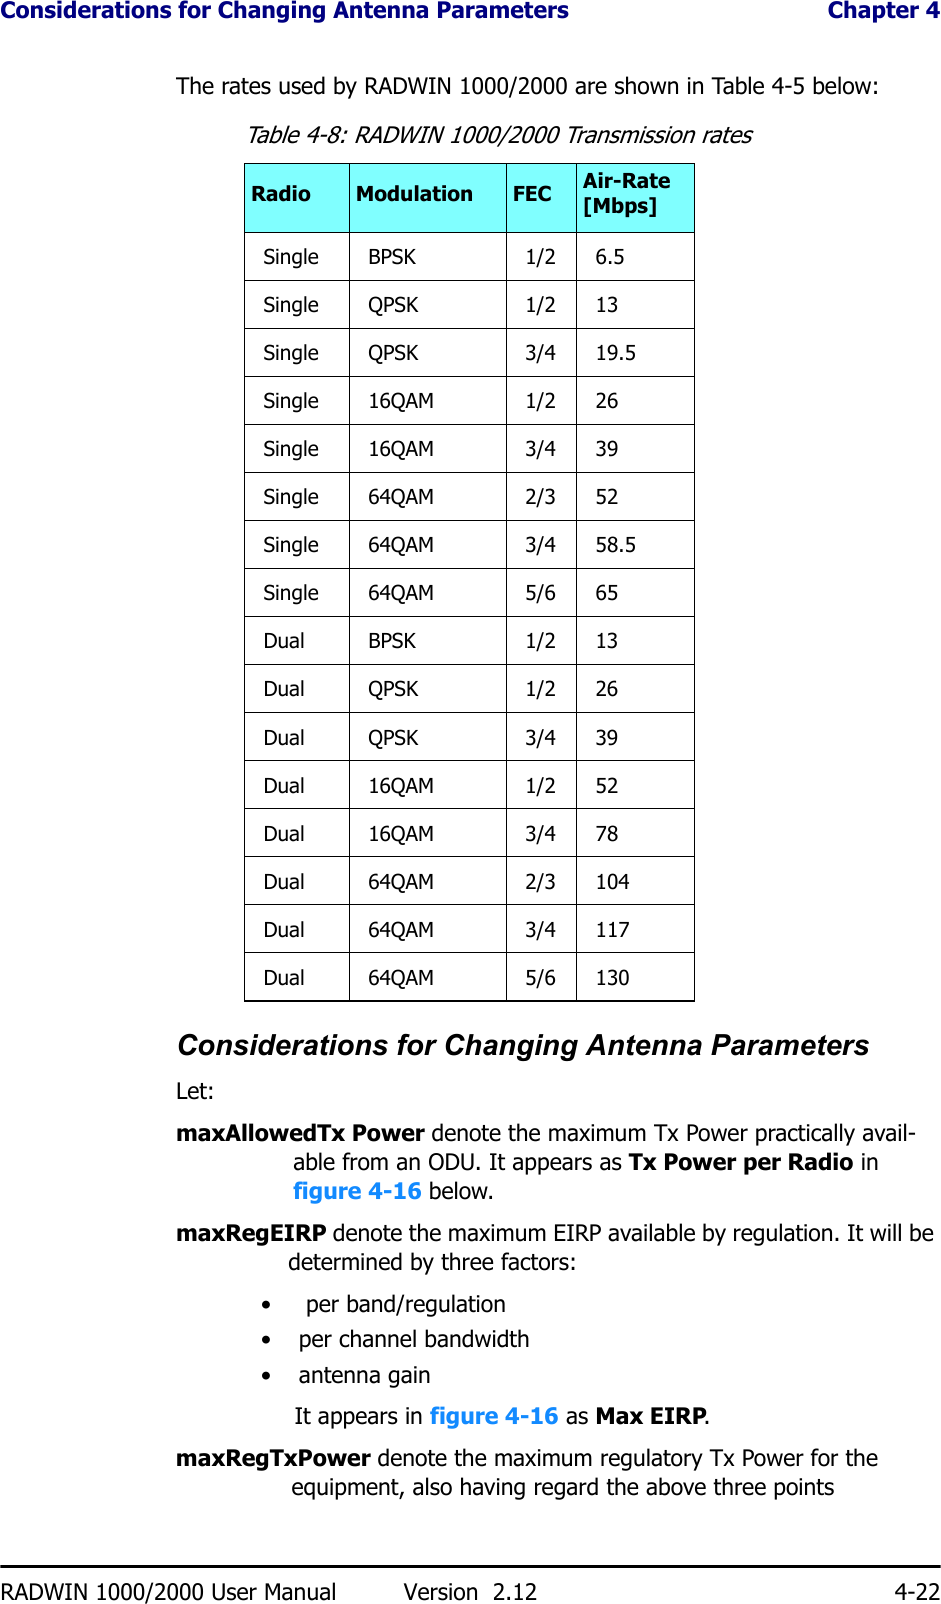 Considerations for Changing Antenna Parameters  Chapter 4RADWIN 1000/2000 User Manual Version  2.12 4-22The rates used by RADWIN 1000/2000 are shown in Table 4-5 below:Considerations for Changing Antenna ParametersLet:maxAllowedTx Power denote the maximum Tx Power practically avail-able from an ODU. It appears as Tx Power per Radio in figure 4-16 below.maxRegEIRP denote the maximum EIRP available by regulation. It will be determined by three factors:•  per band/regulation• per channel bandwidth•antenna gainIt appears in figure 4-16 as Max EIRP.maxRegTxPower denote the maximum regulatory Tx Power for the equipment, also having regard the above three pointsTable 4-8: RADWIN 1000/2000 Transmission ratesRadio Modulation FEC Air-Rate [Mbps]Single BPSK 1/2 6.5Single QPSK 1/2 13Single QPSK 3/4 19.5Single 16QAM 1/2 26Single 16QAM 3/4 39Single 64QAM 2/3 52Single 64QAM 3/4 58.5Single 64QAM 5/6 65Dual BPSK 1/2 13Dual QPSK 1/2 26Dual QPSK 3/4 39Dual 16QAM 1/2 52Dual 16QAM 3/4 78Dual 64QAM 2/3 104Dual 64QAM 3/4 117Dual 64QAM 5/6 130